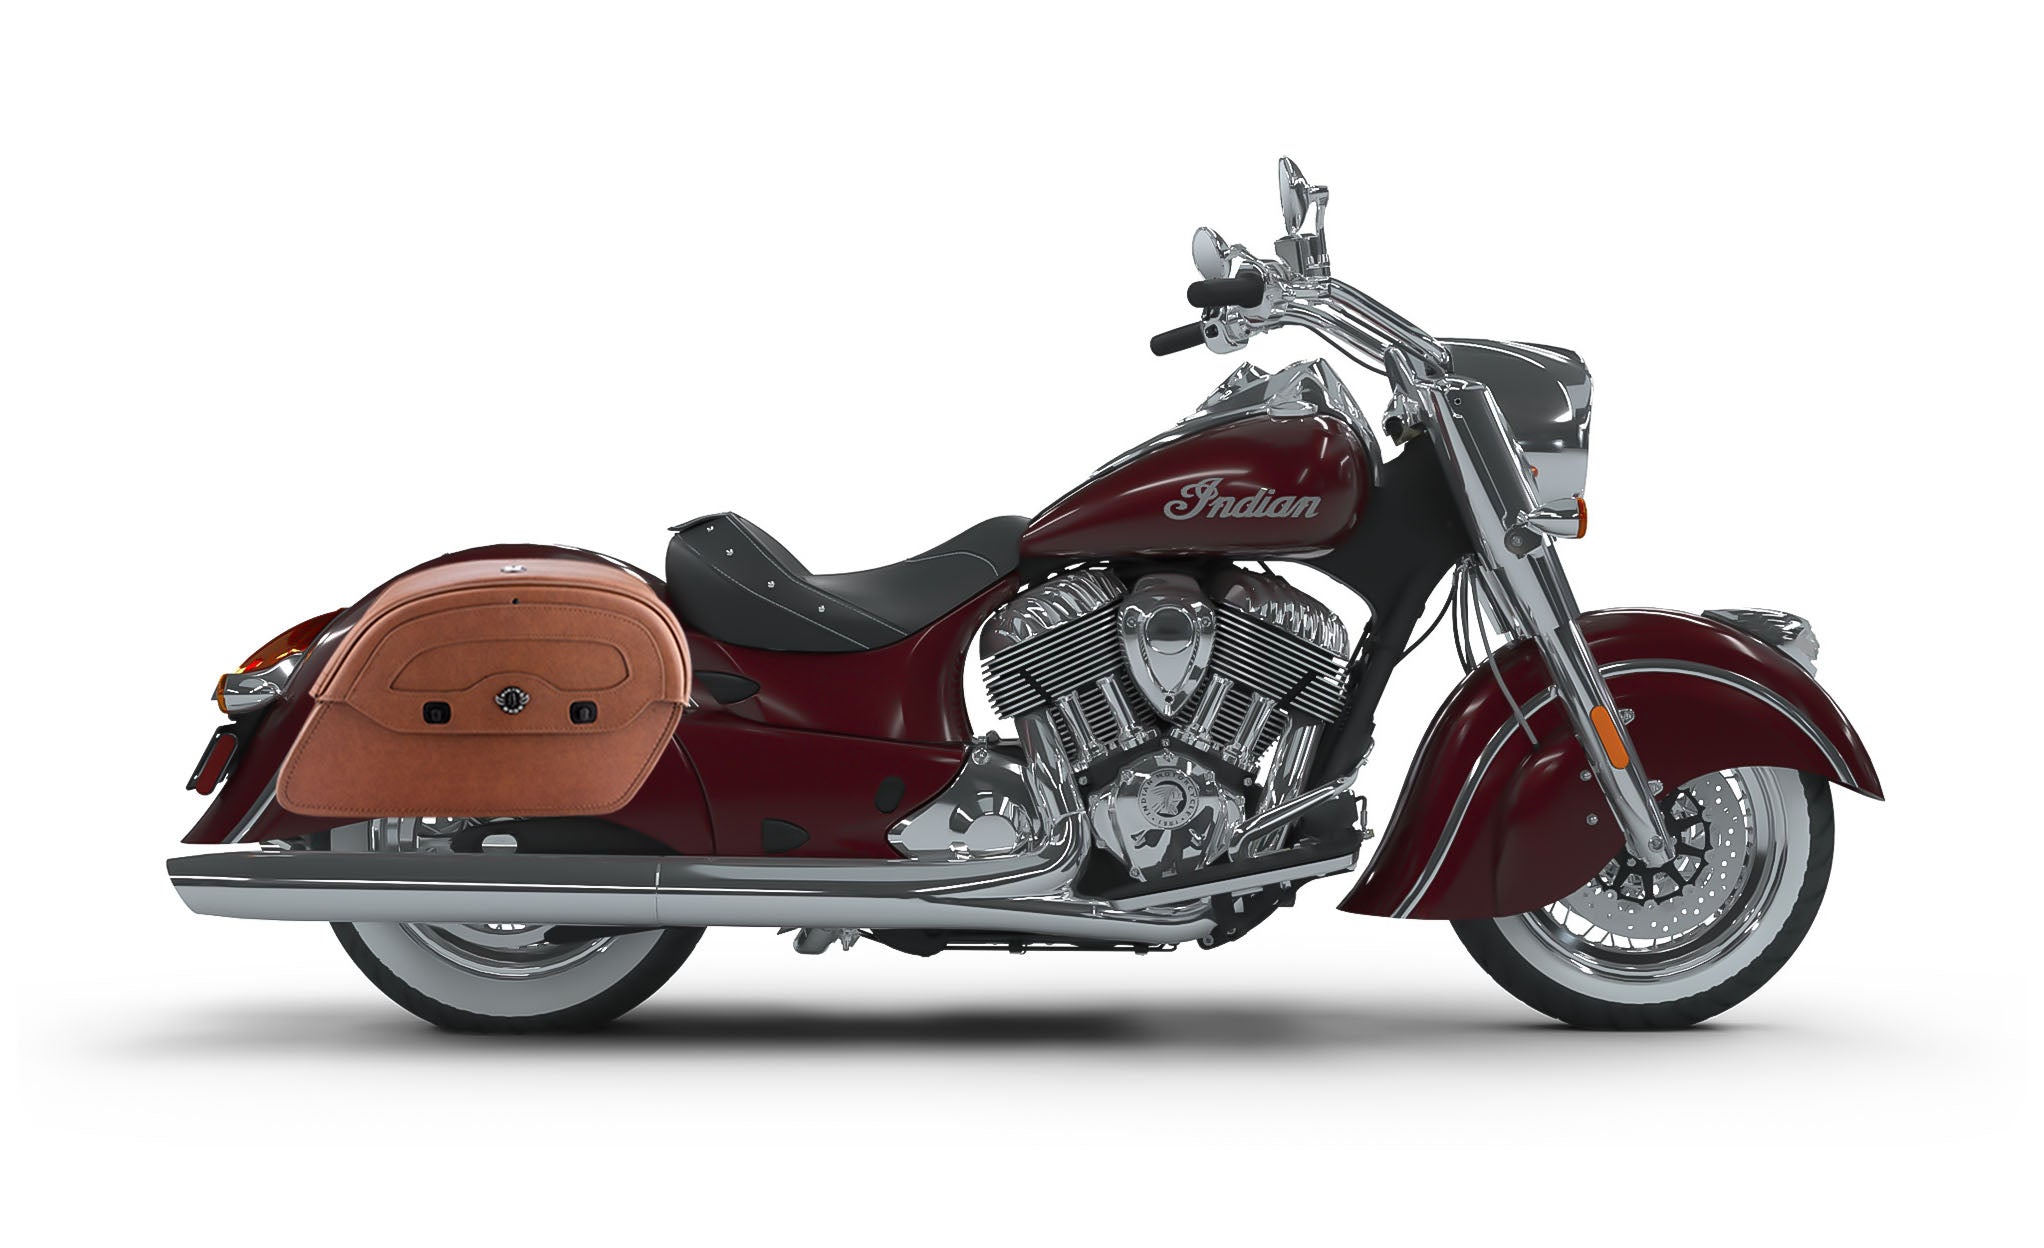 Viking Warrior Brown Large Indian Chief Classic Leather Motorcycle Saddlebags on Bike Photo @expand